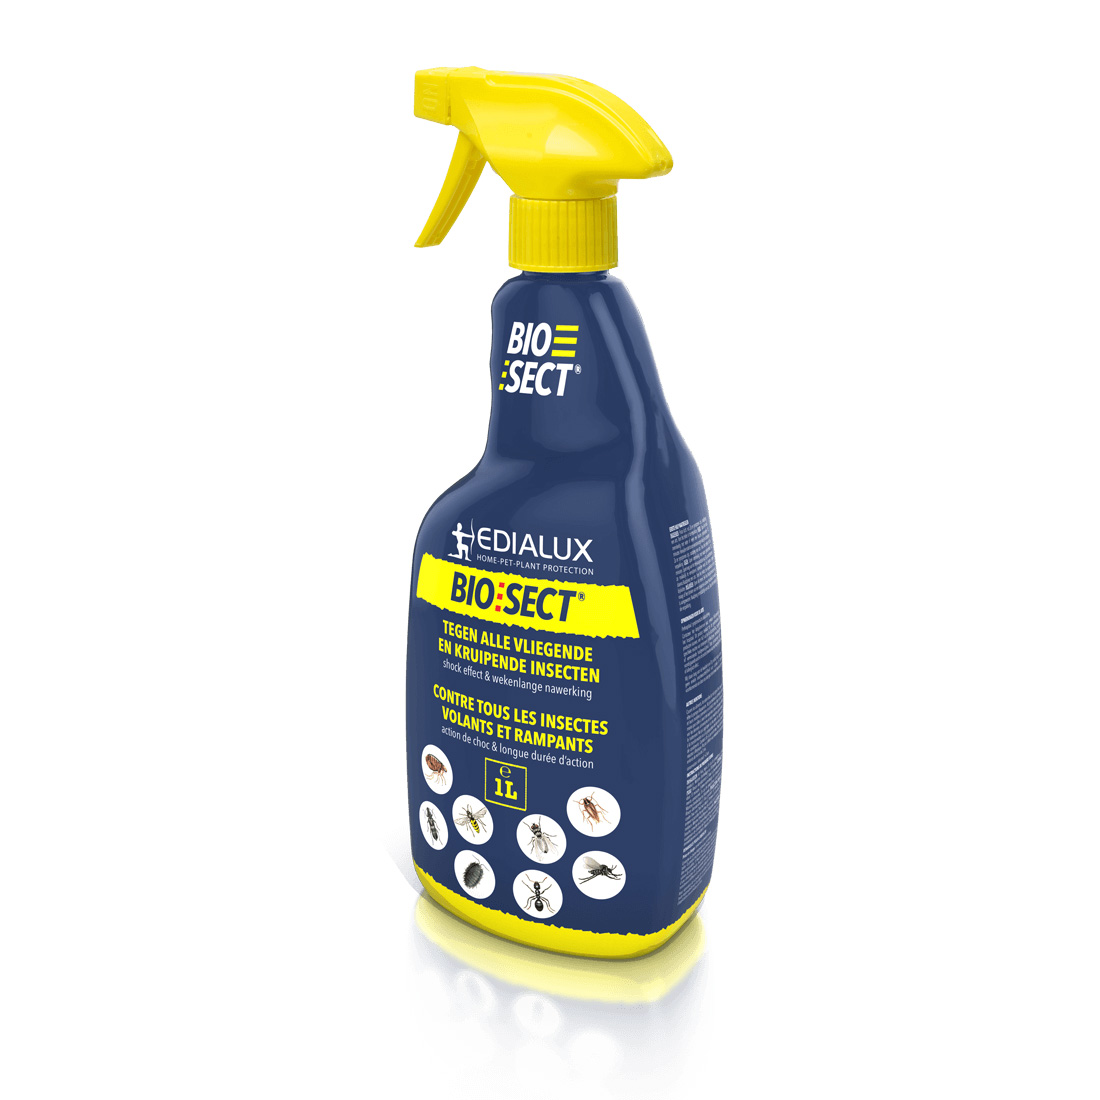 Produit anti insectes, Insecticide